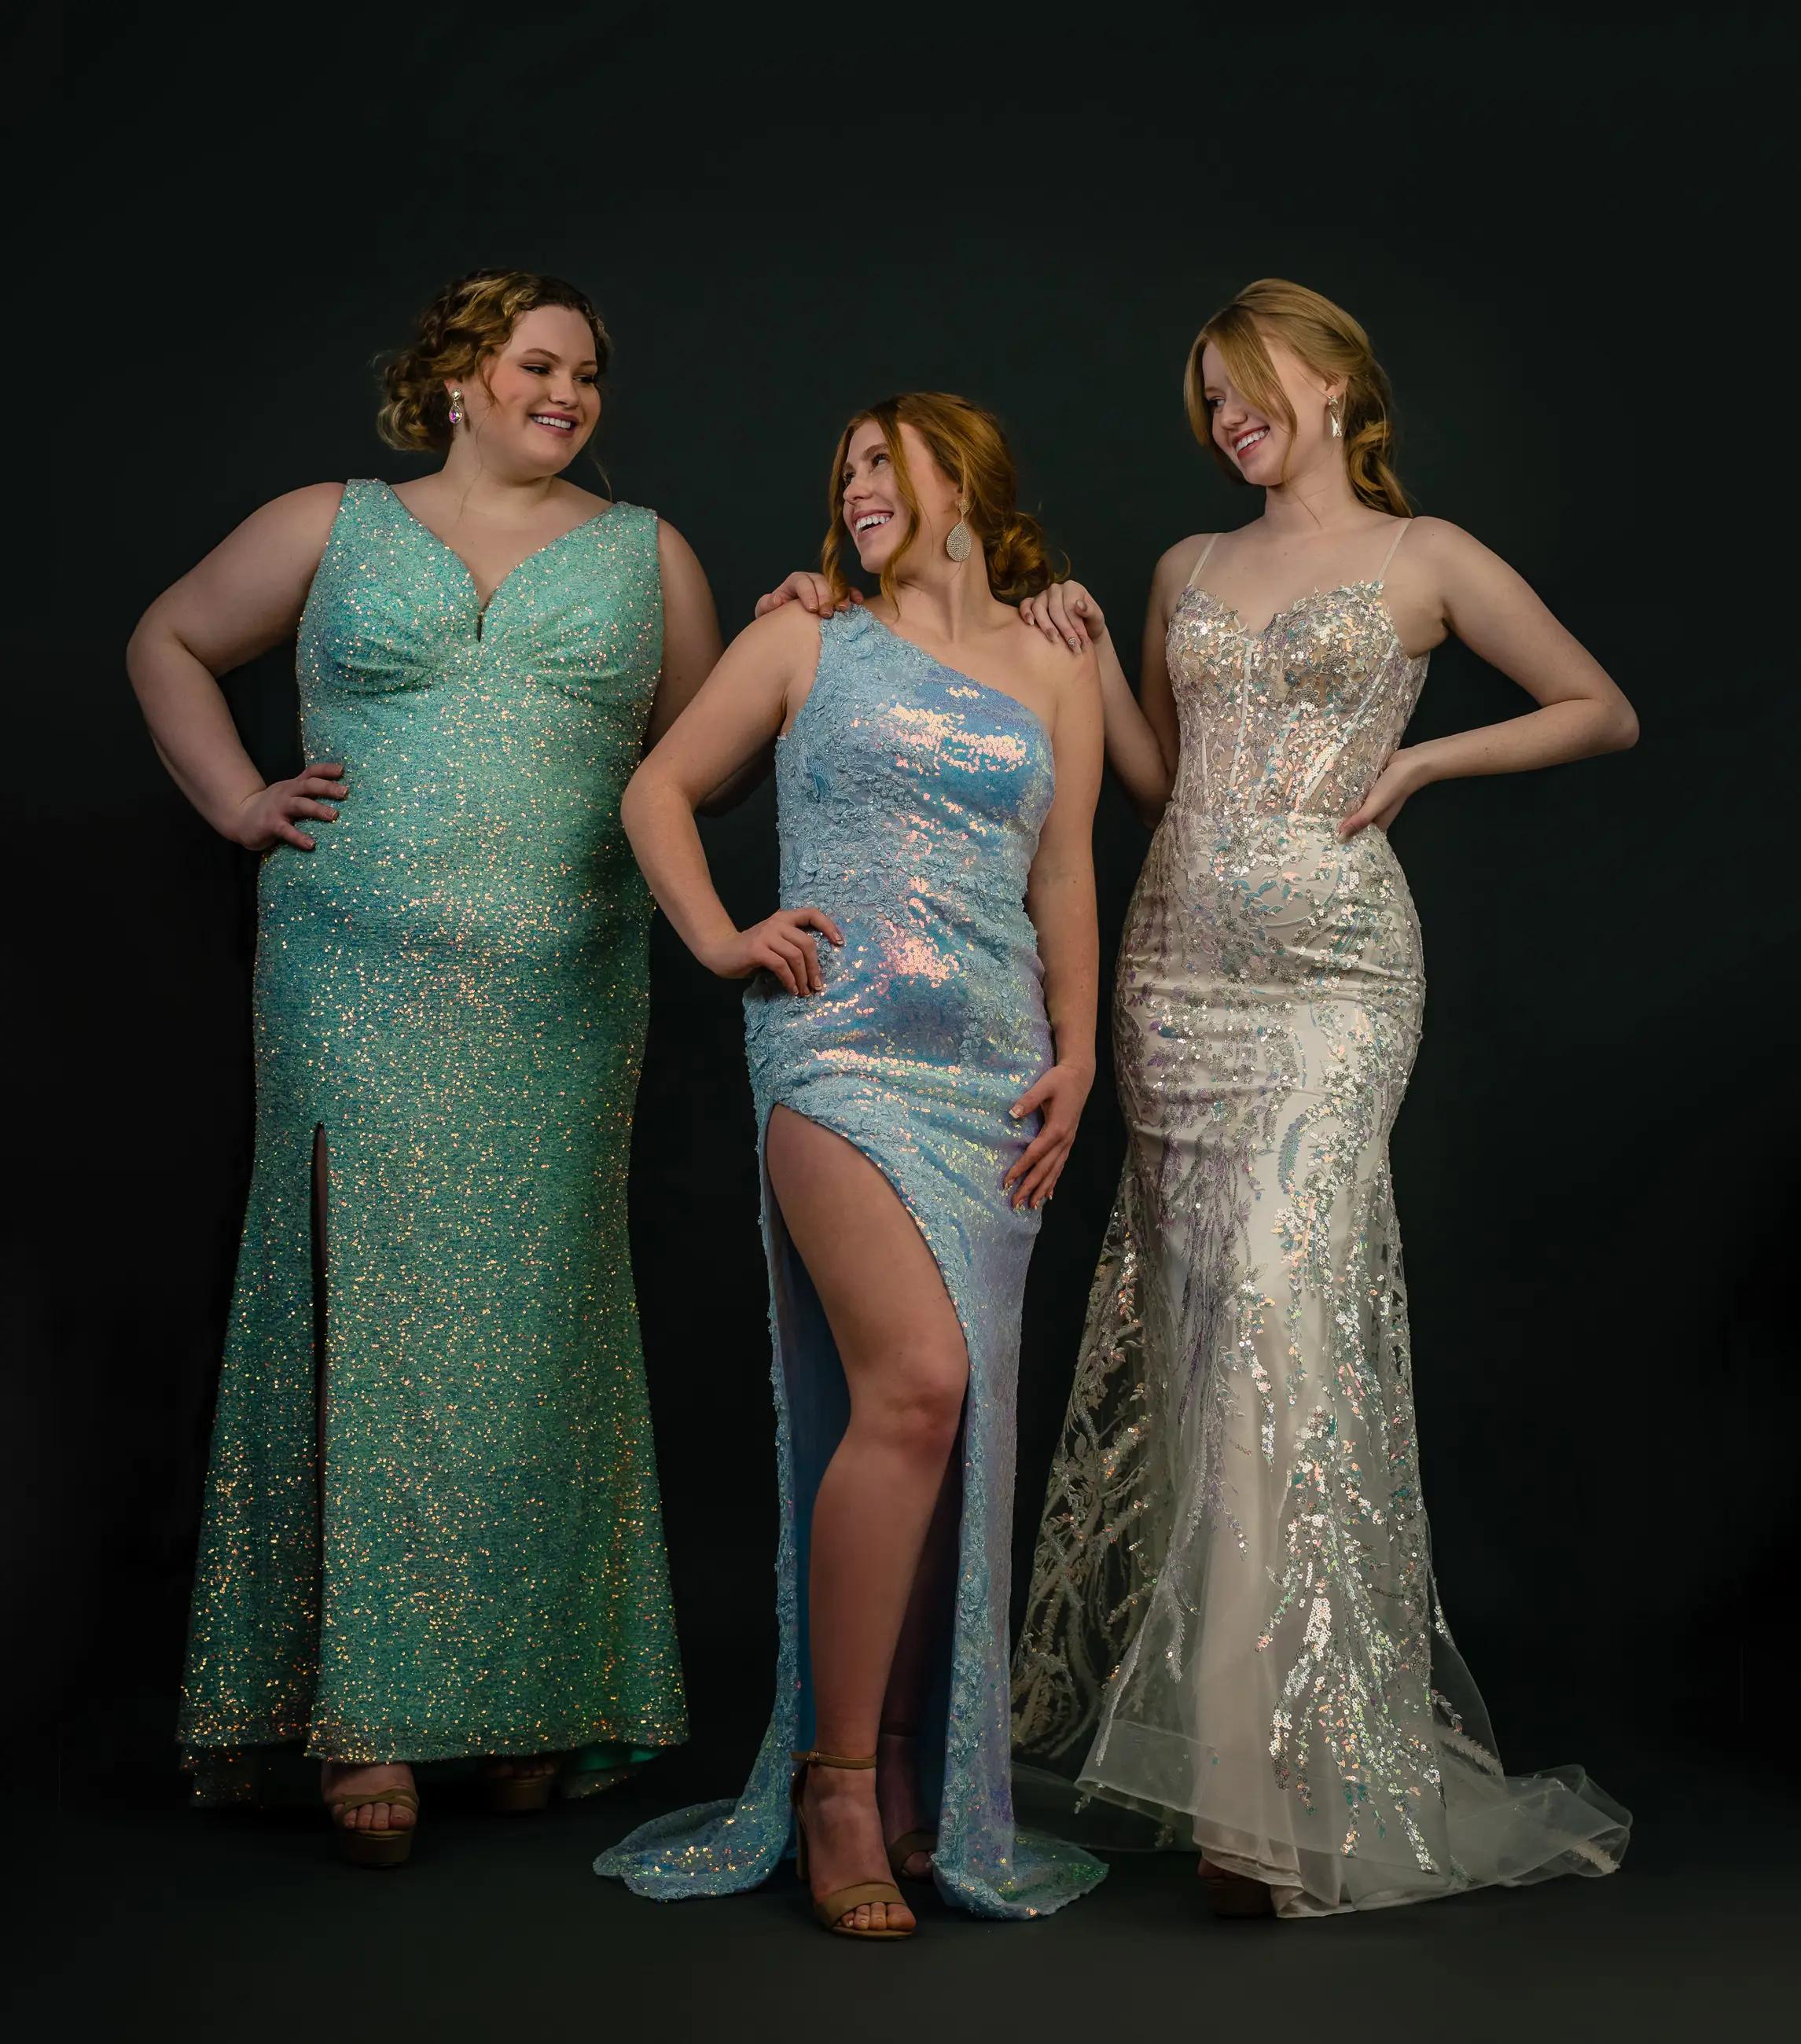 TBC Occasions Prom Dresses in Denver, Colorado TBC Occasions TBC Squad Denver Prom Dresses Sarah Lindsay Photography